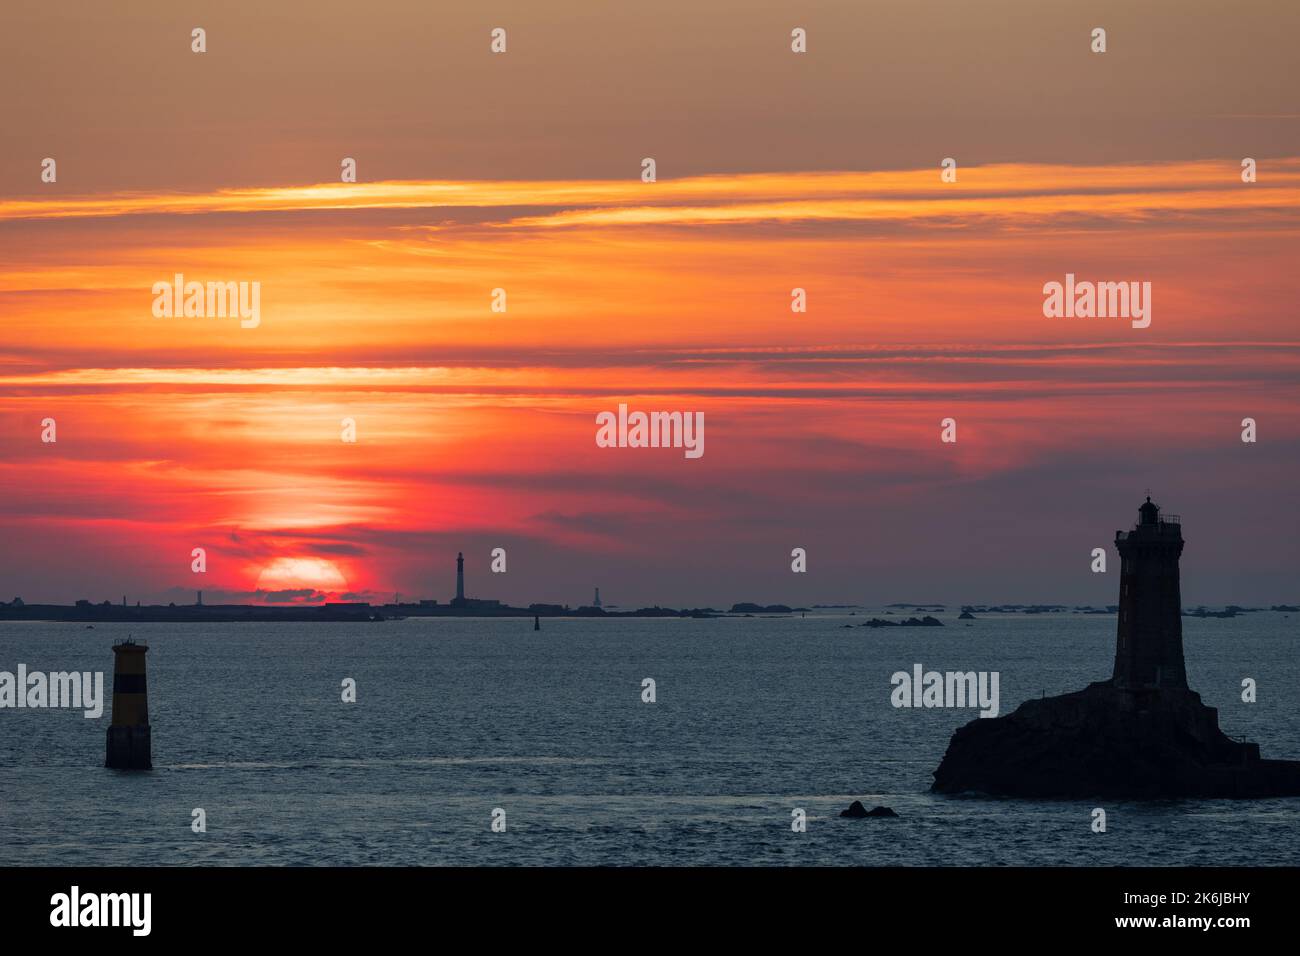 Warm colorful sunset over the Vieille lighthouse and the Sein island in Brittany, France Stock Photo